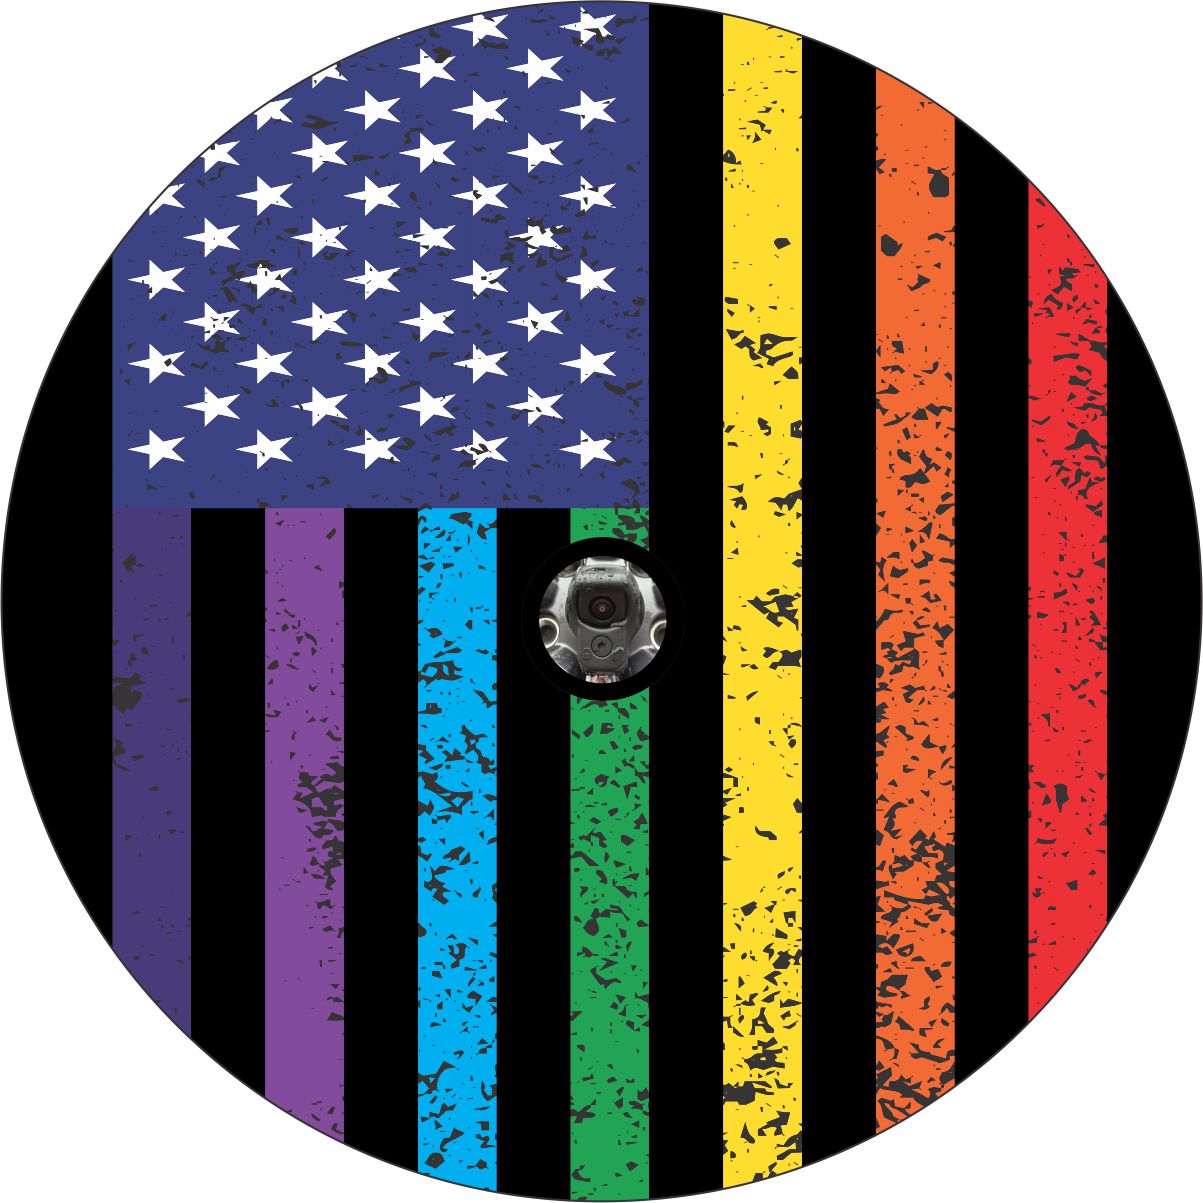 Black vinyl spare tire cover design of what looks like an American flag with white stars but with distressed rainbow colors for stripes in red, orange, yellow, green, blue, indigo, and violet plus a center hole to fit a back up camera on a spare wheel.